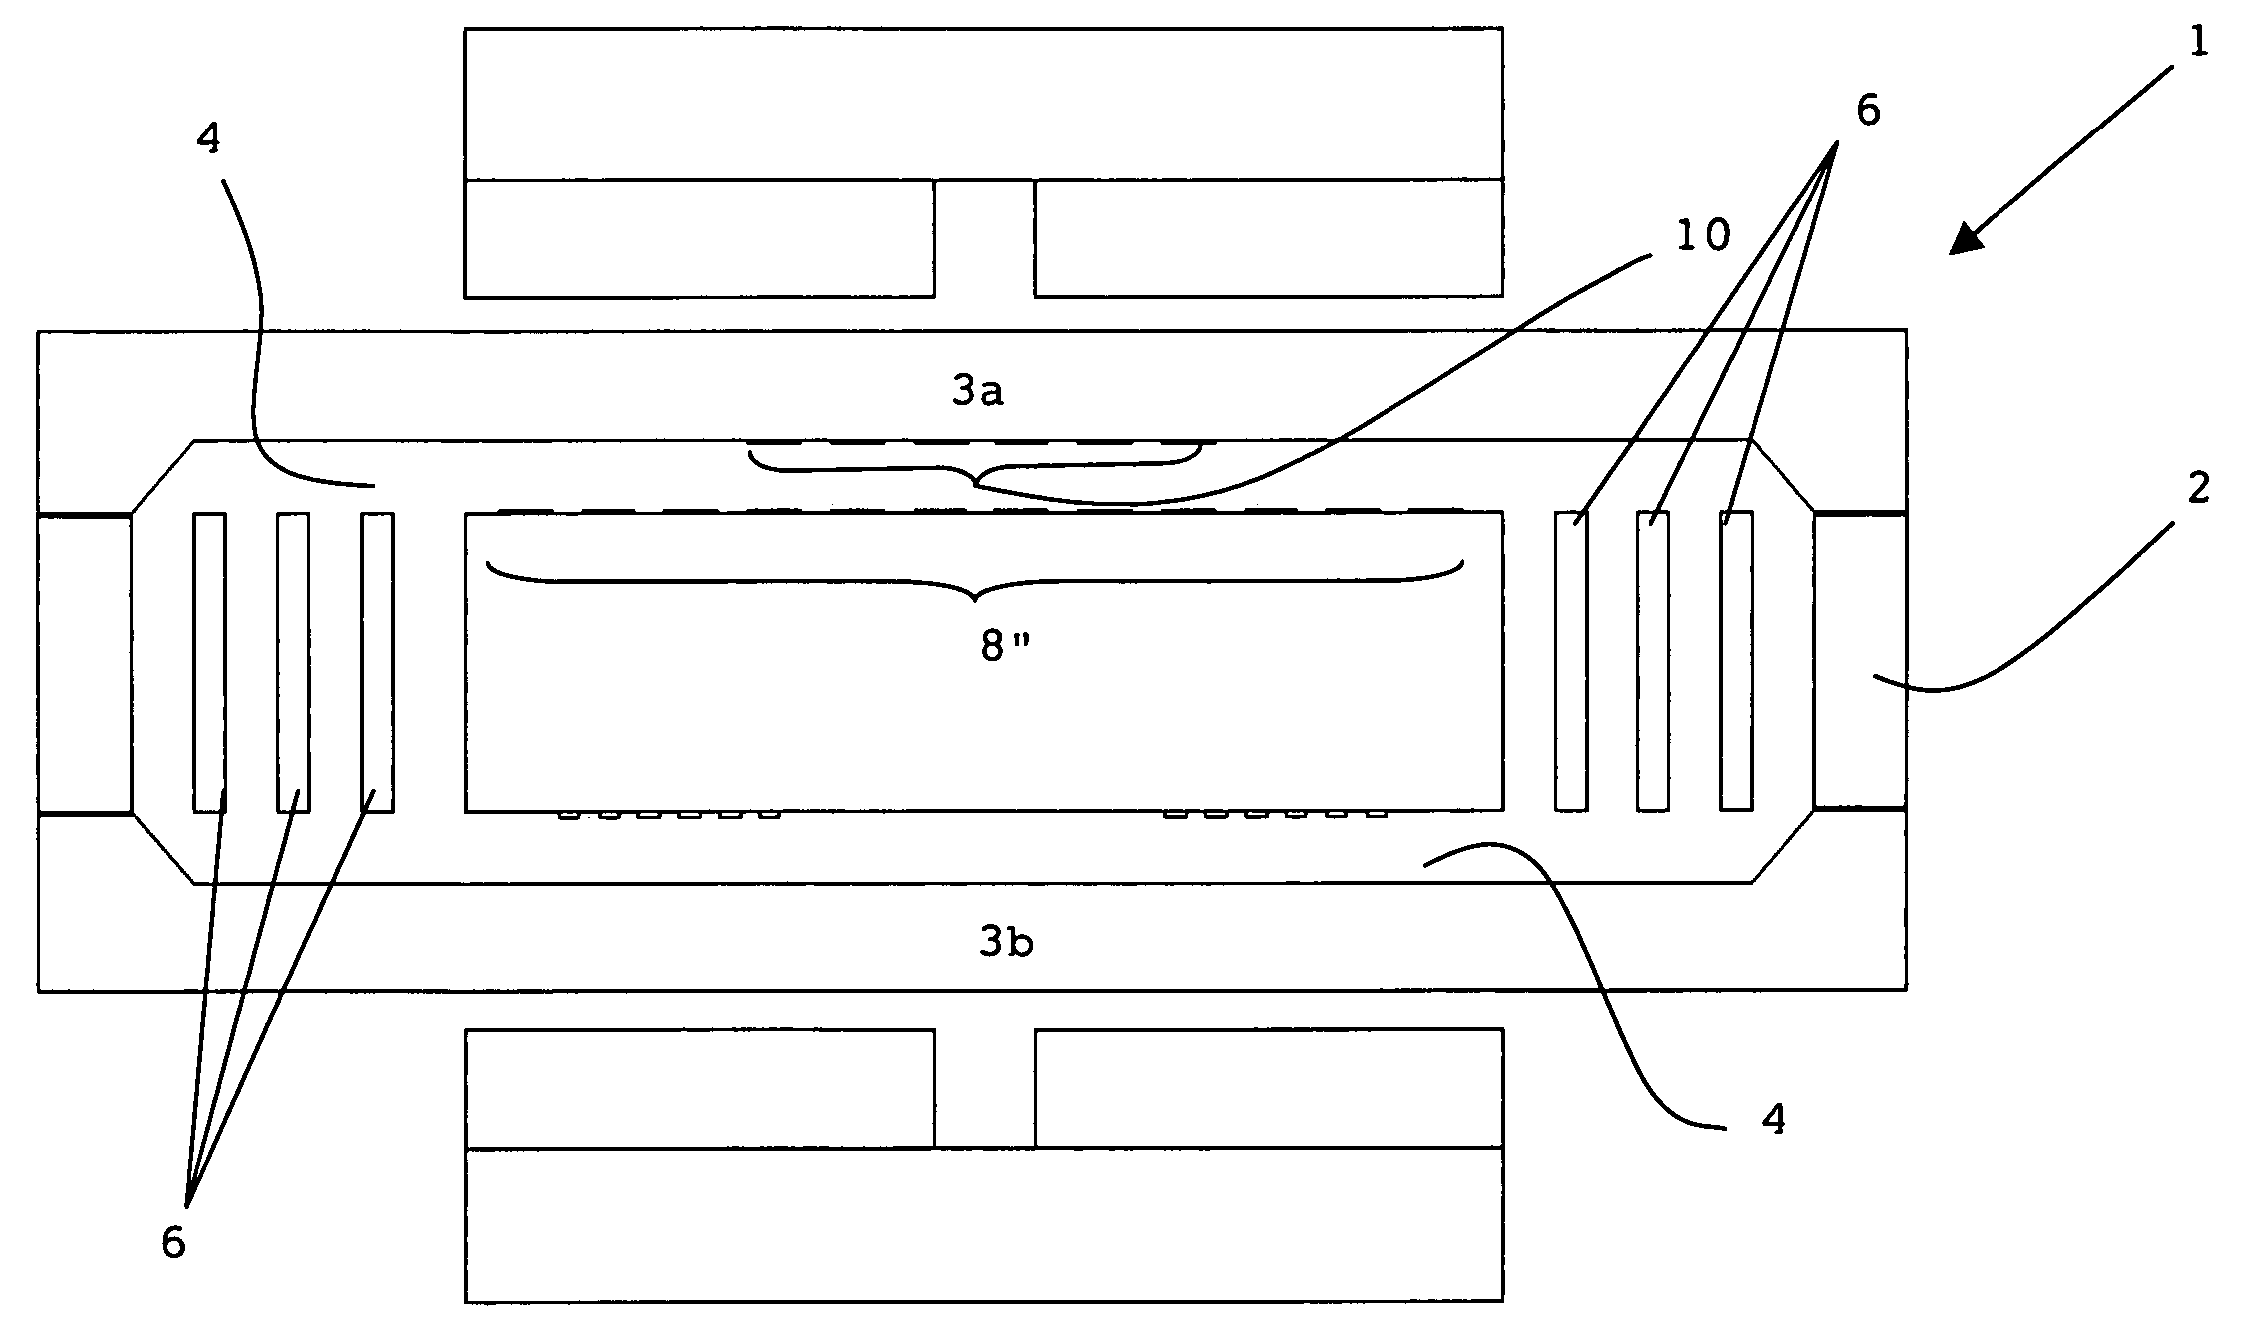 Micro-machined suspension plate with integral proof mass for use in a seismometer or other device